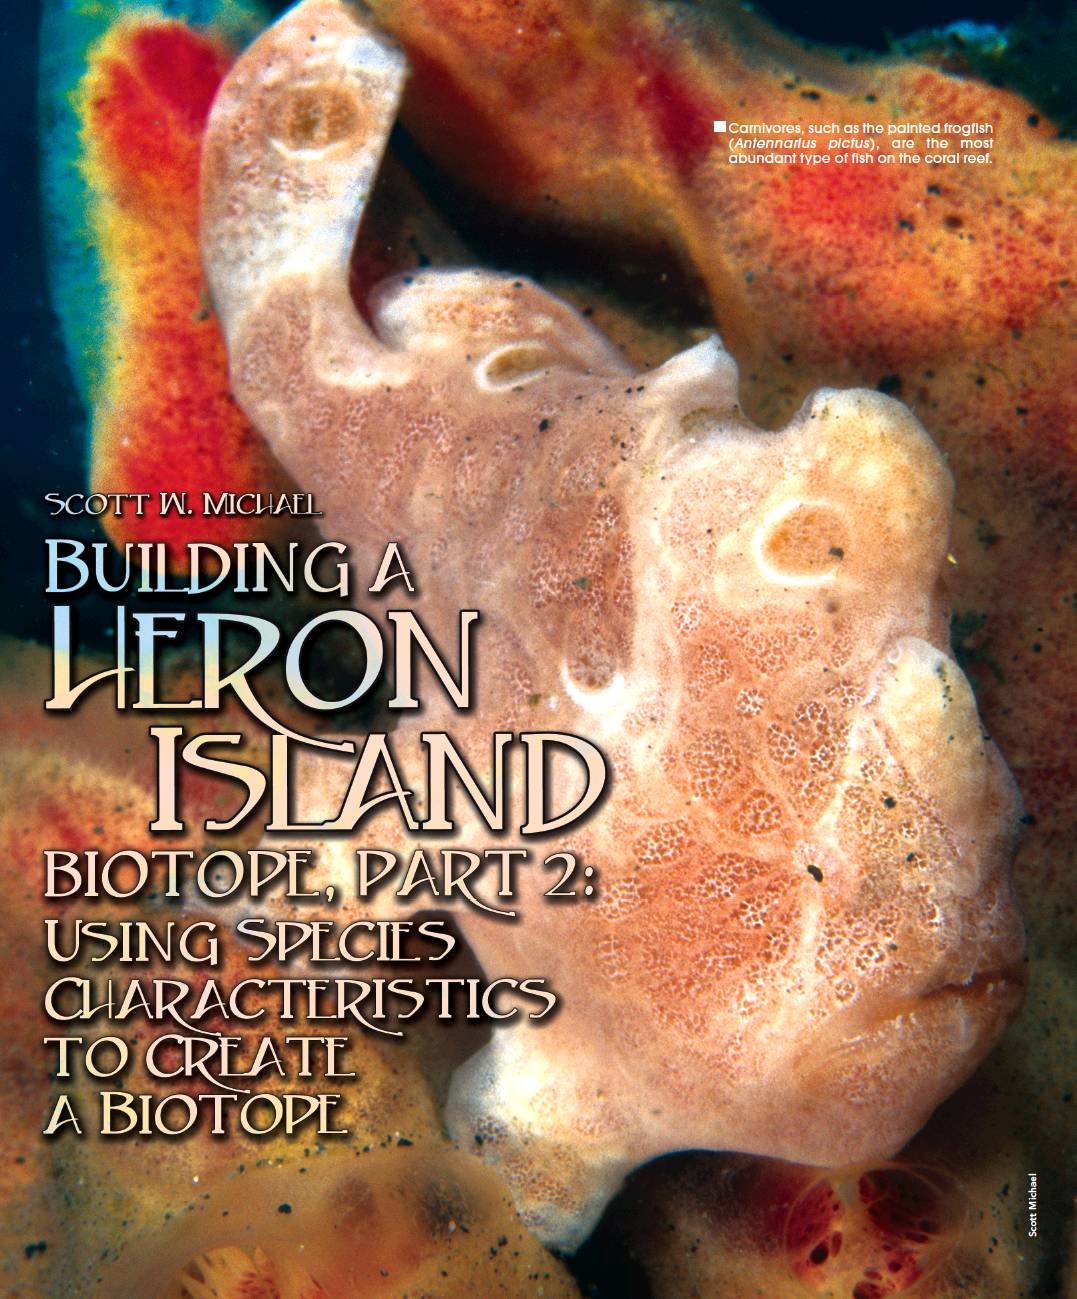 Tropical Fish Hobbyist - February 2013 - BUILDING A HERON ISLAND BIOTOPE,  PART 2: USING SPECIES CHARACTERISTICS TO CREATE A BIOTOPE